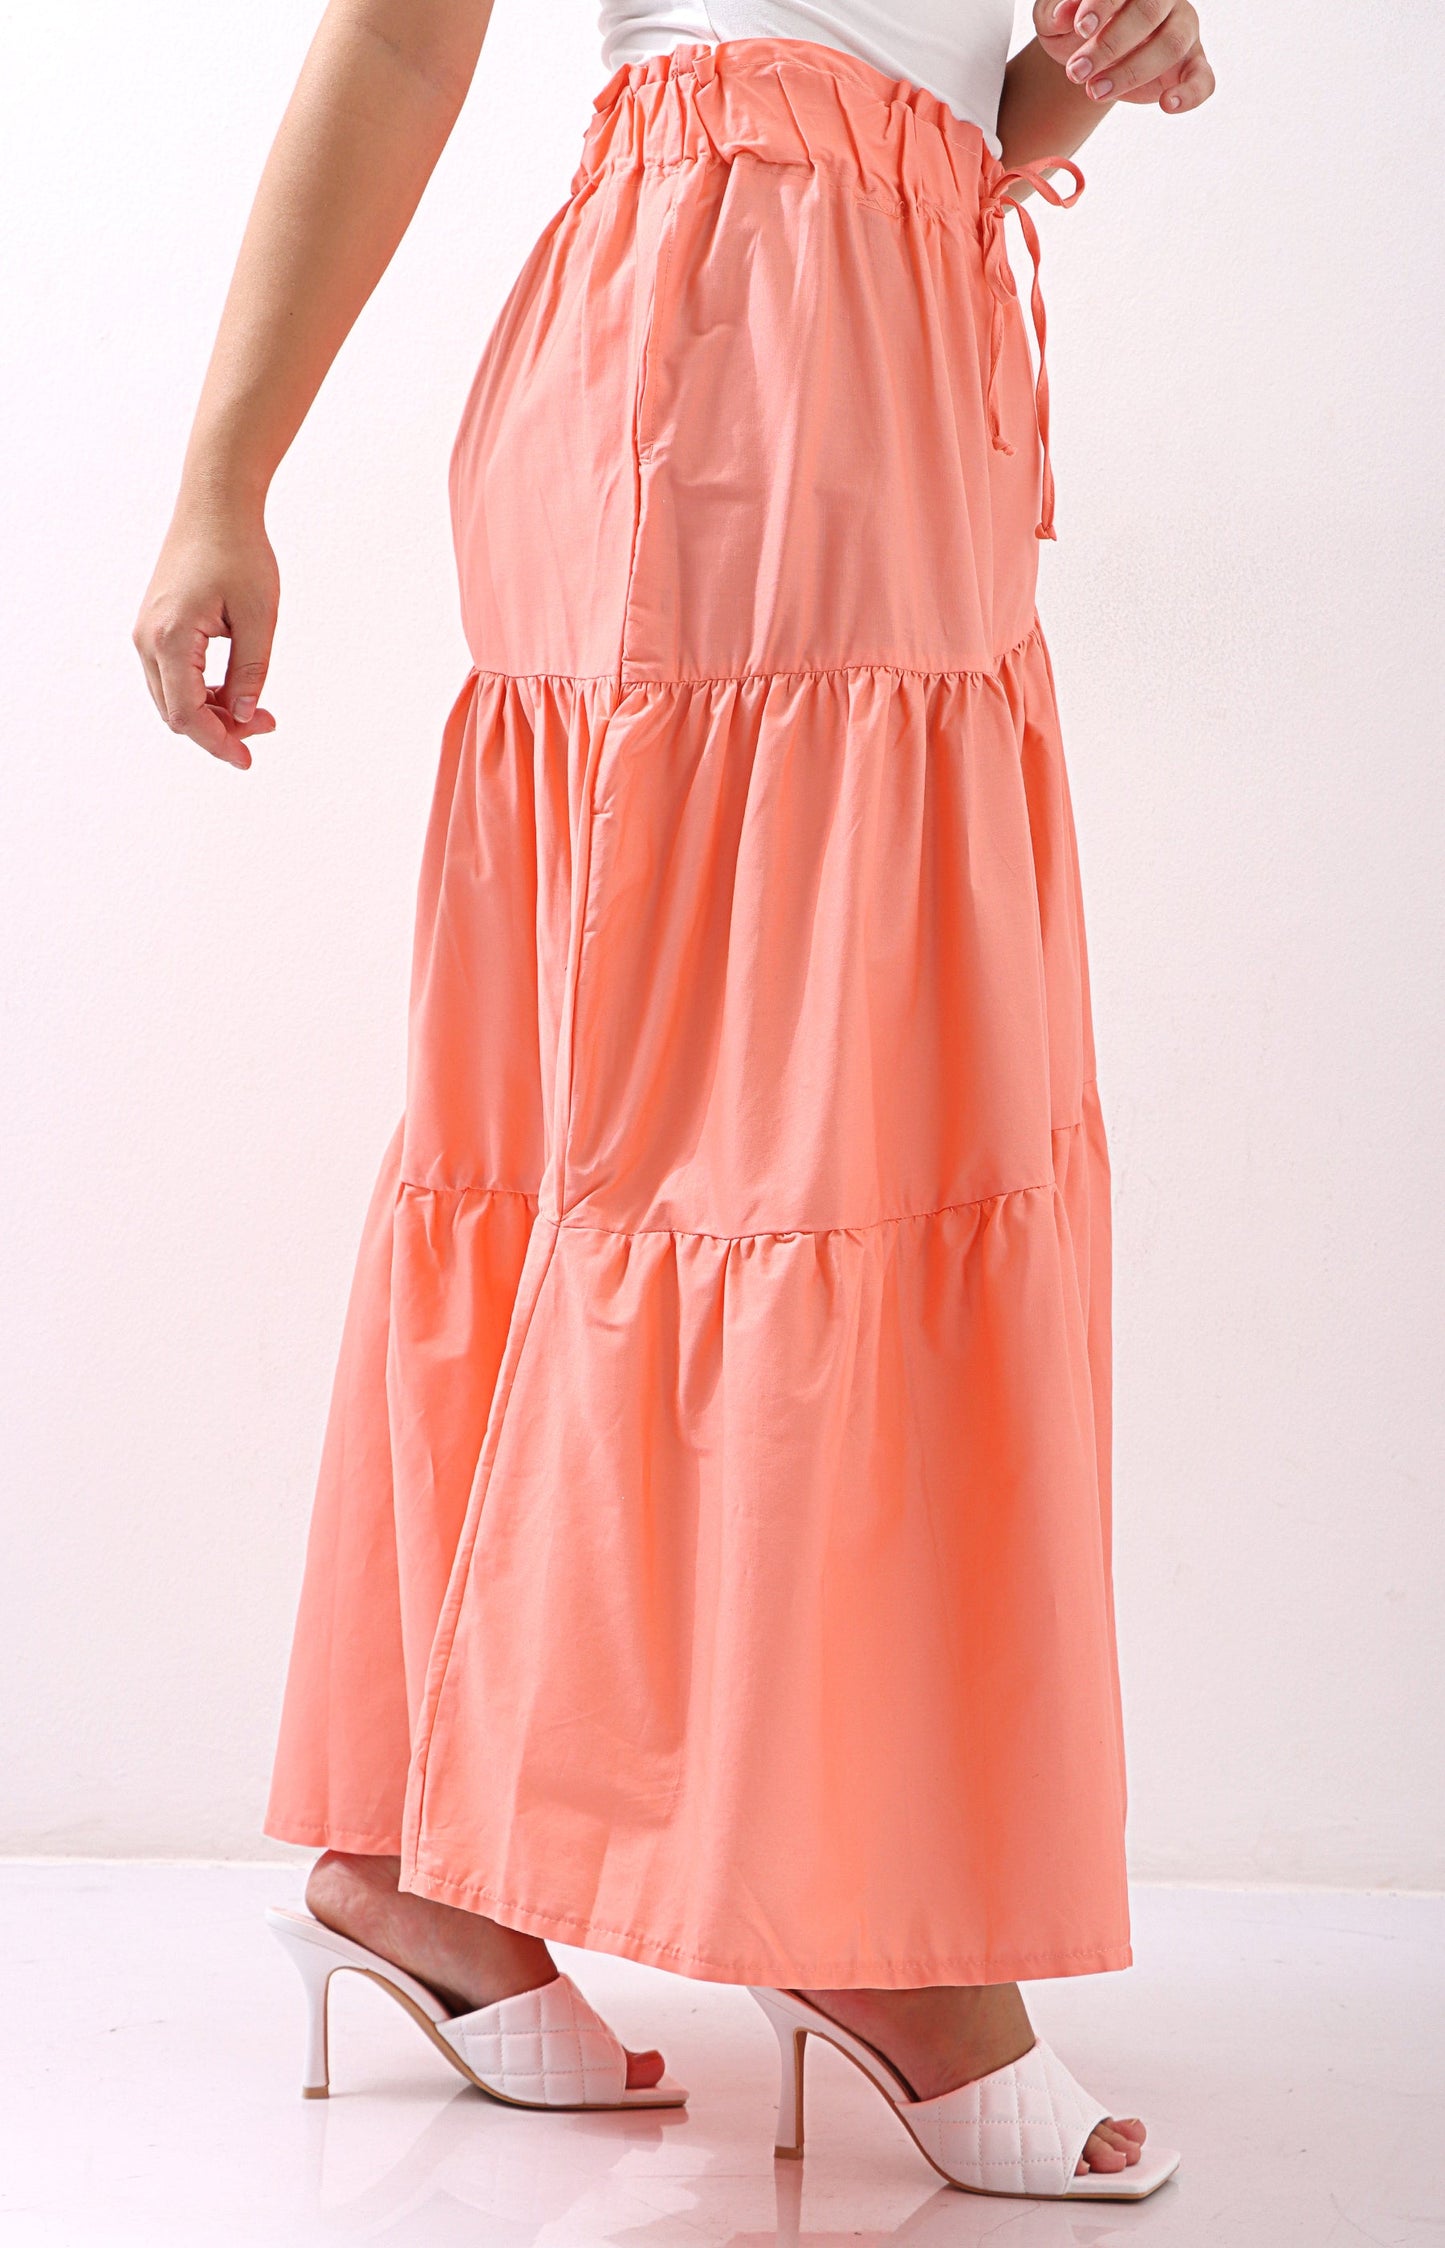 Ladies Tiered Maxi Skirt - Coral